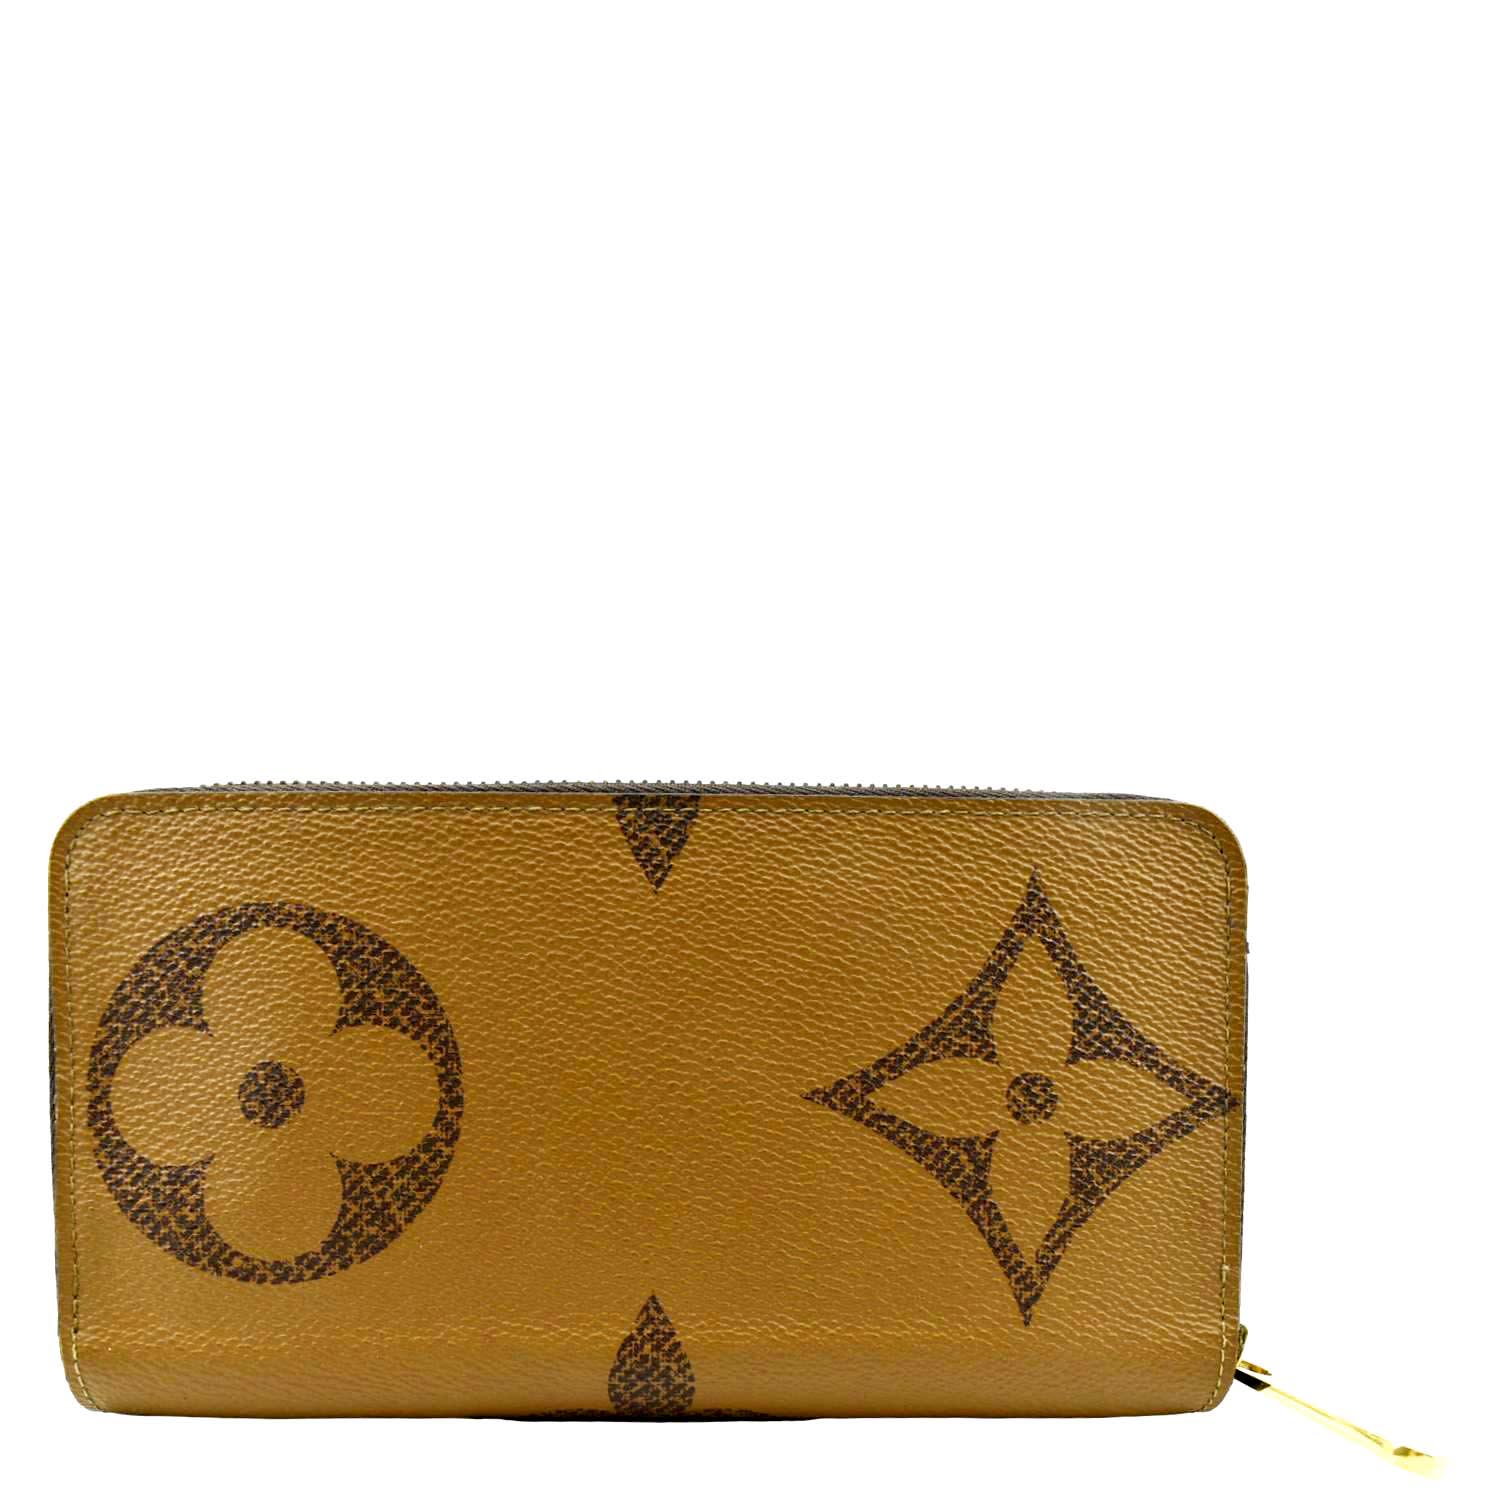 Zippy Wallet Monogram Reverse Canvas - Wallets and Small Leather